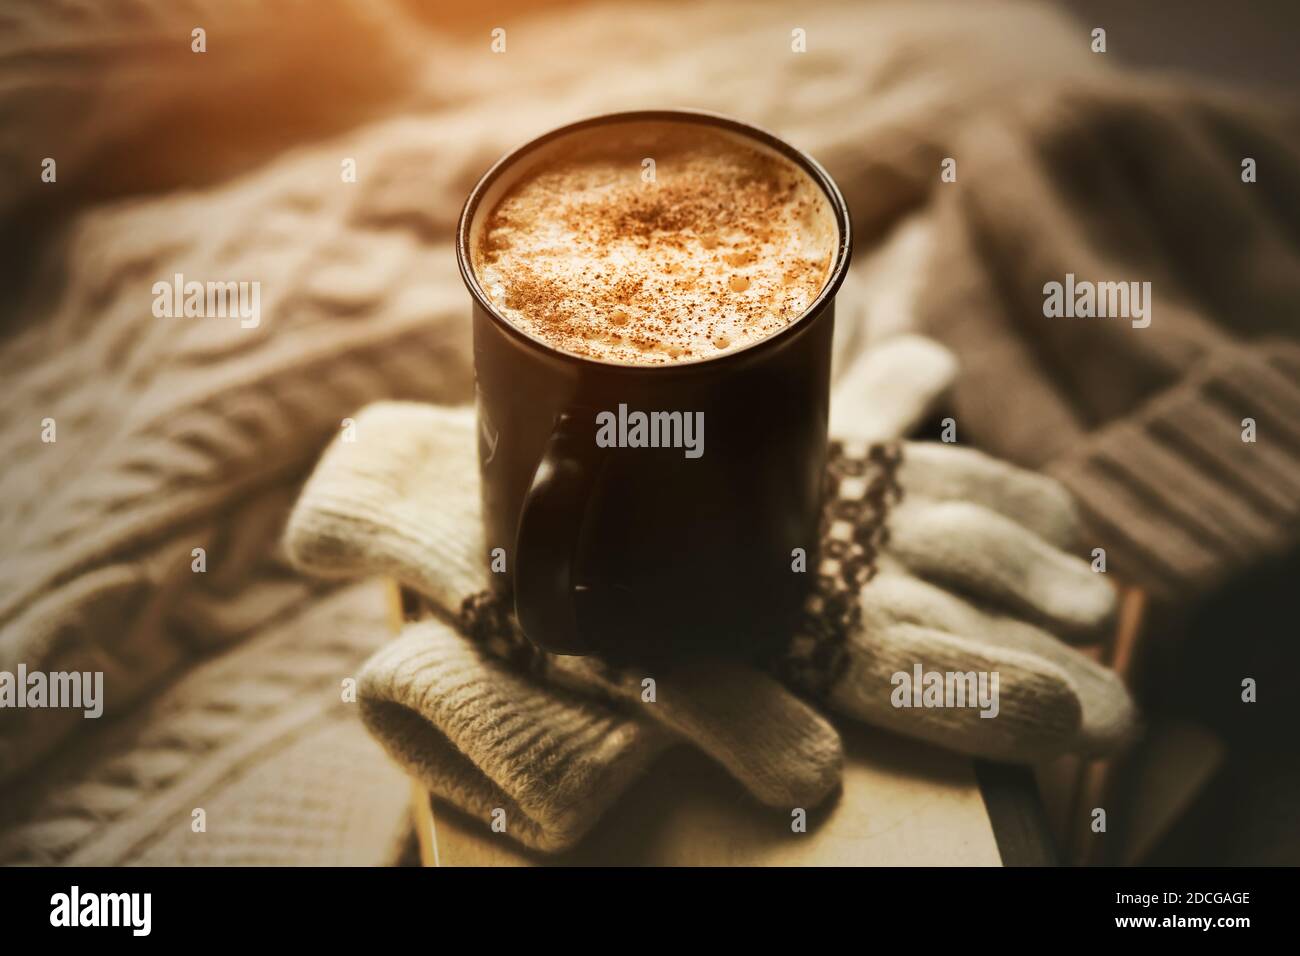 A mug of hot, aroma coffee with cream and cinnamon sprinkles sits on top of a stack of old books and white wool gloves with patterns, and a warm sweat Stock Photo